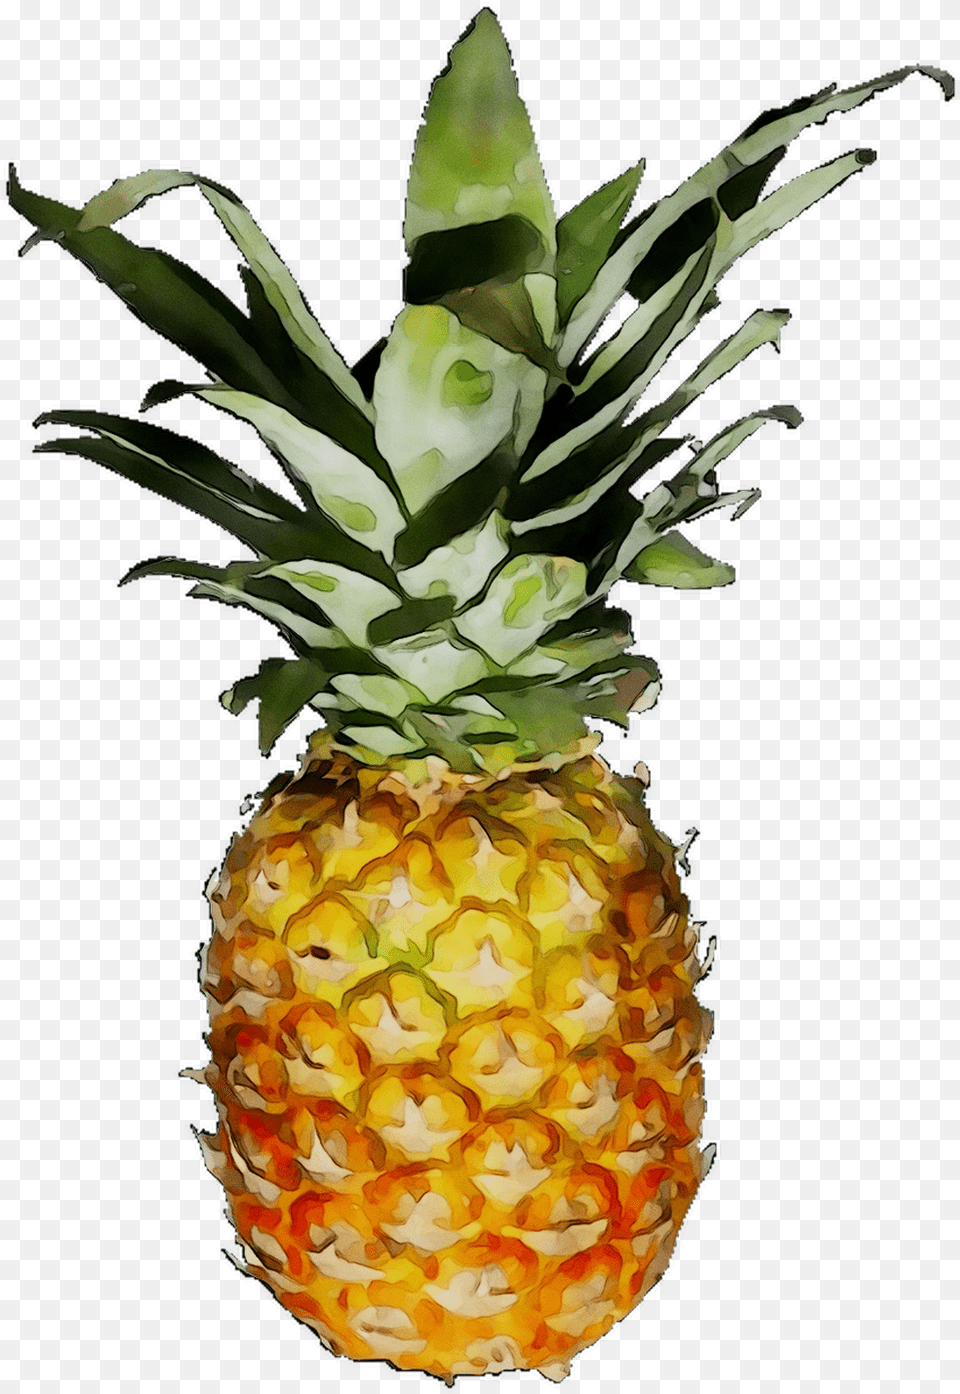 Download Pineapple Jpg Background, Food, Fruit, Plant, Produce Png